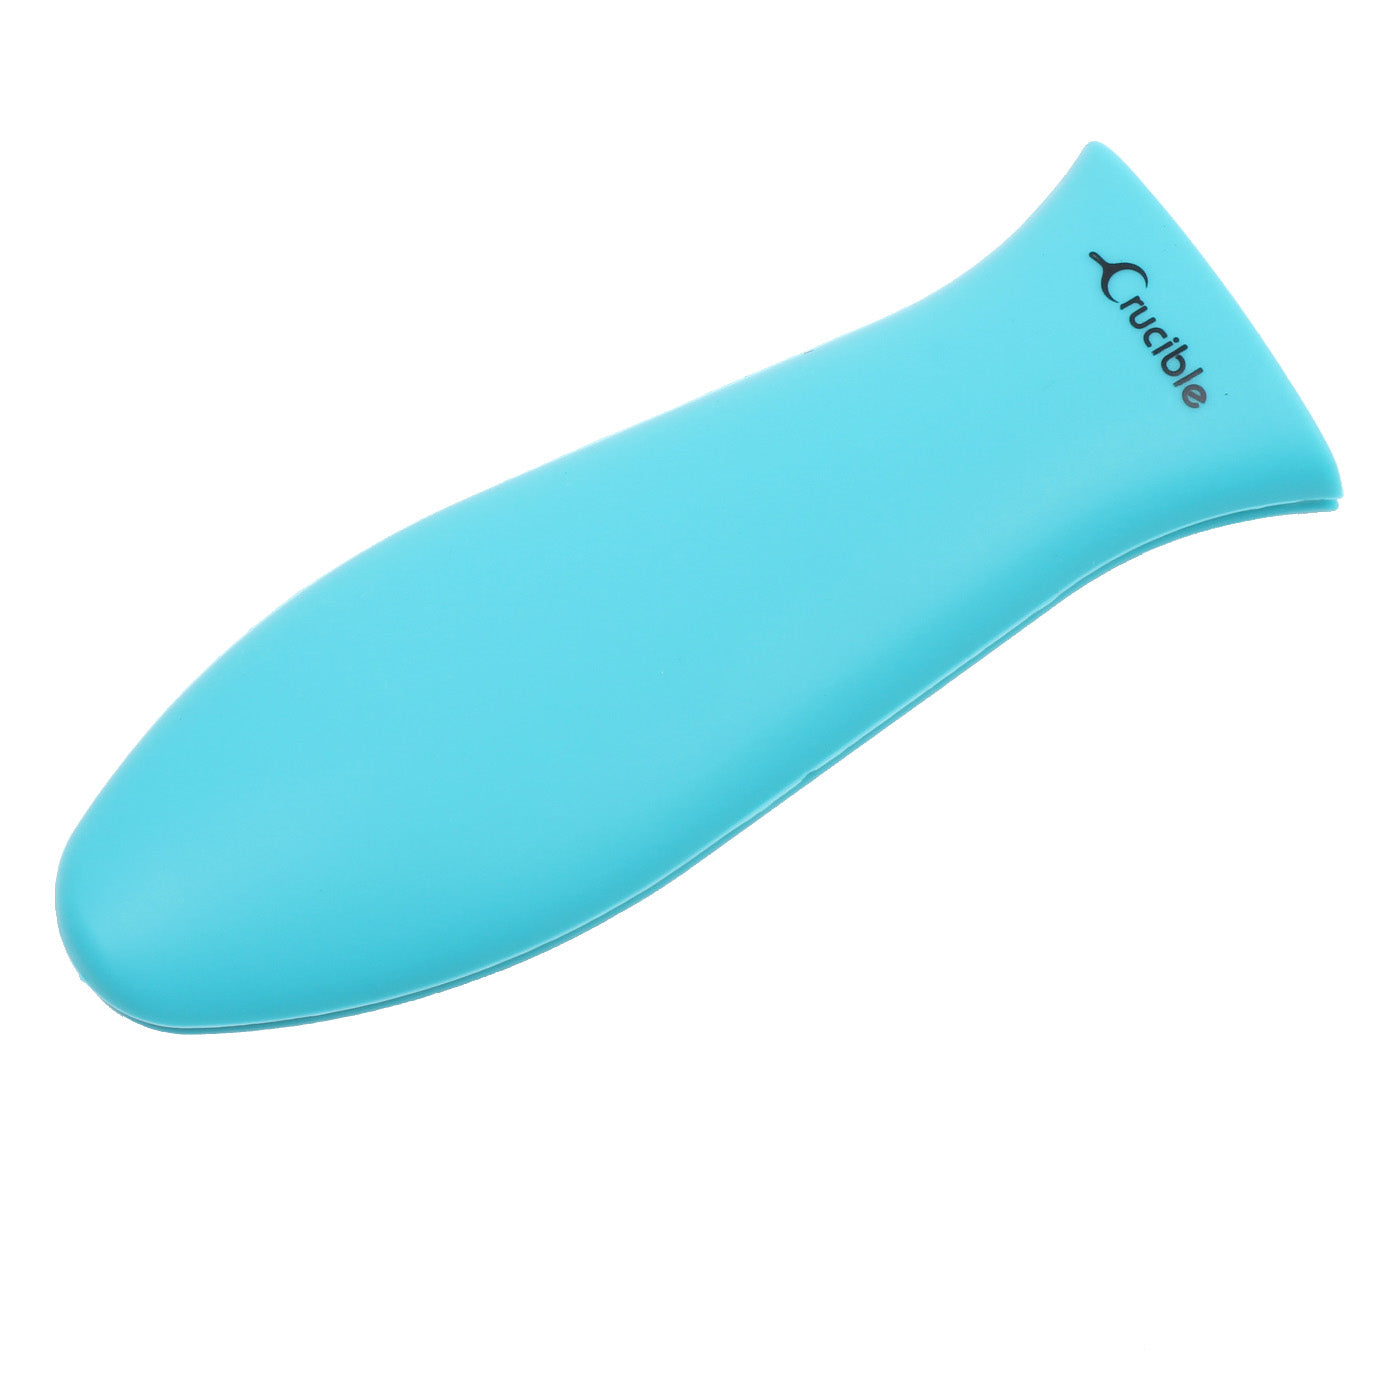 Silicone Hot Handle Holders Light Blue